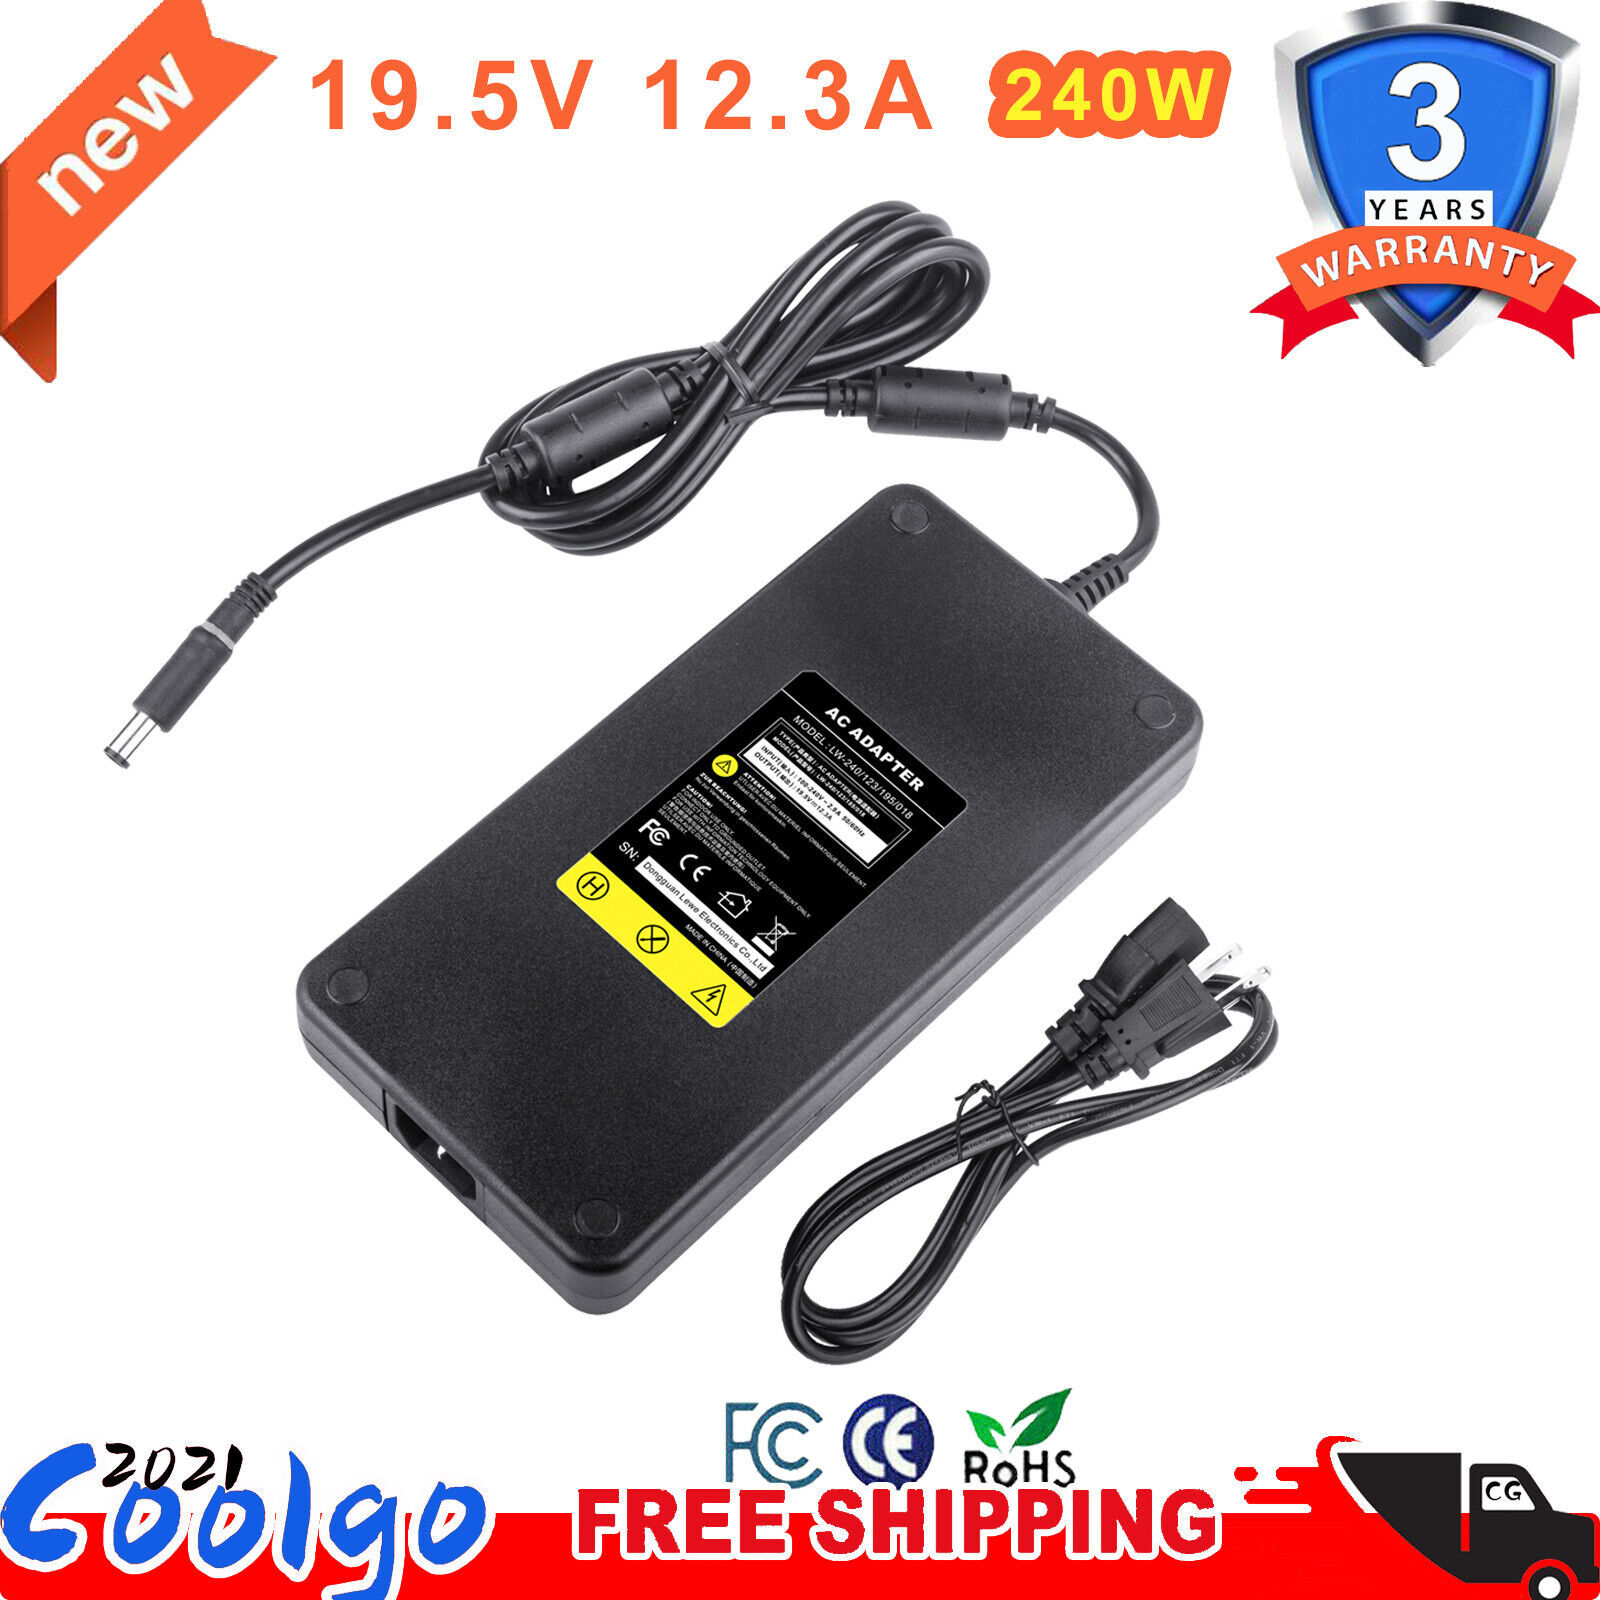 Power Supply Adapter For Dell Precision M6600 M6700 M6800 Laptops 240W Pa-9E Cg - $65.99